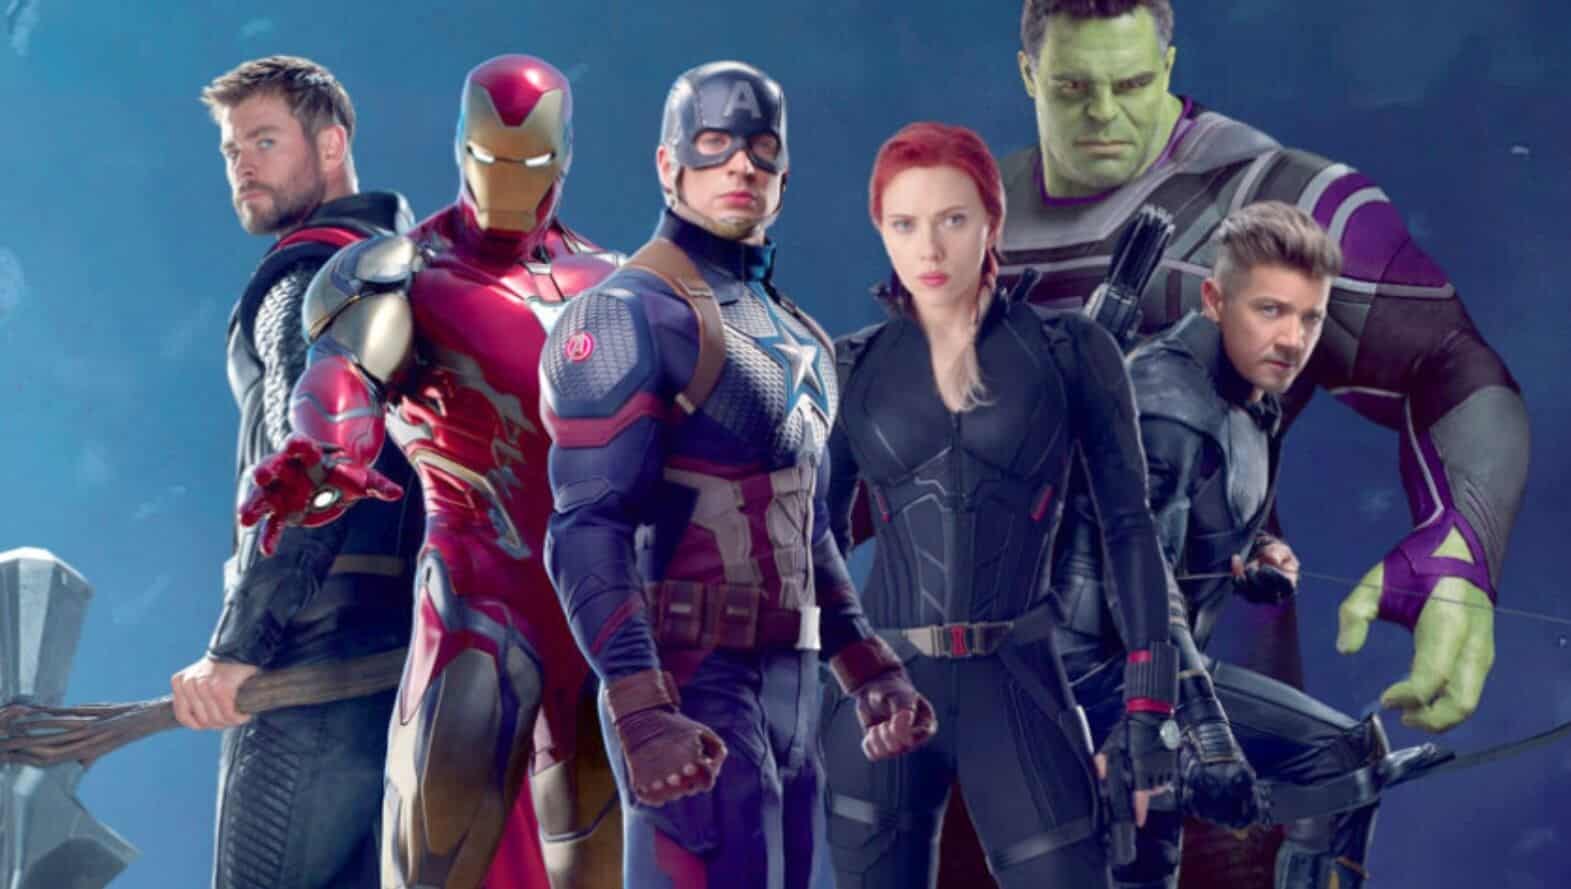 Could There Be An MCU Future For The Original Avengers After 'Avengers: Endgame'?1571 x 889